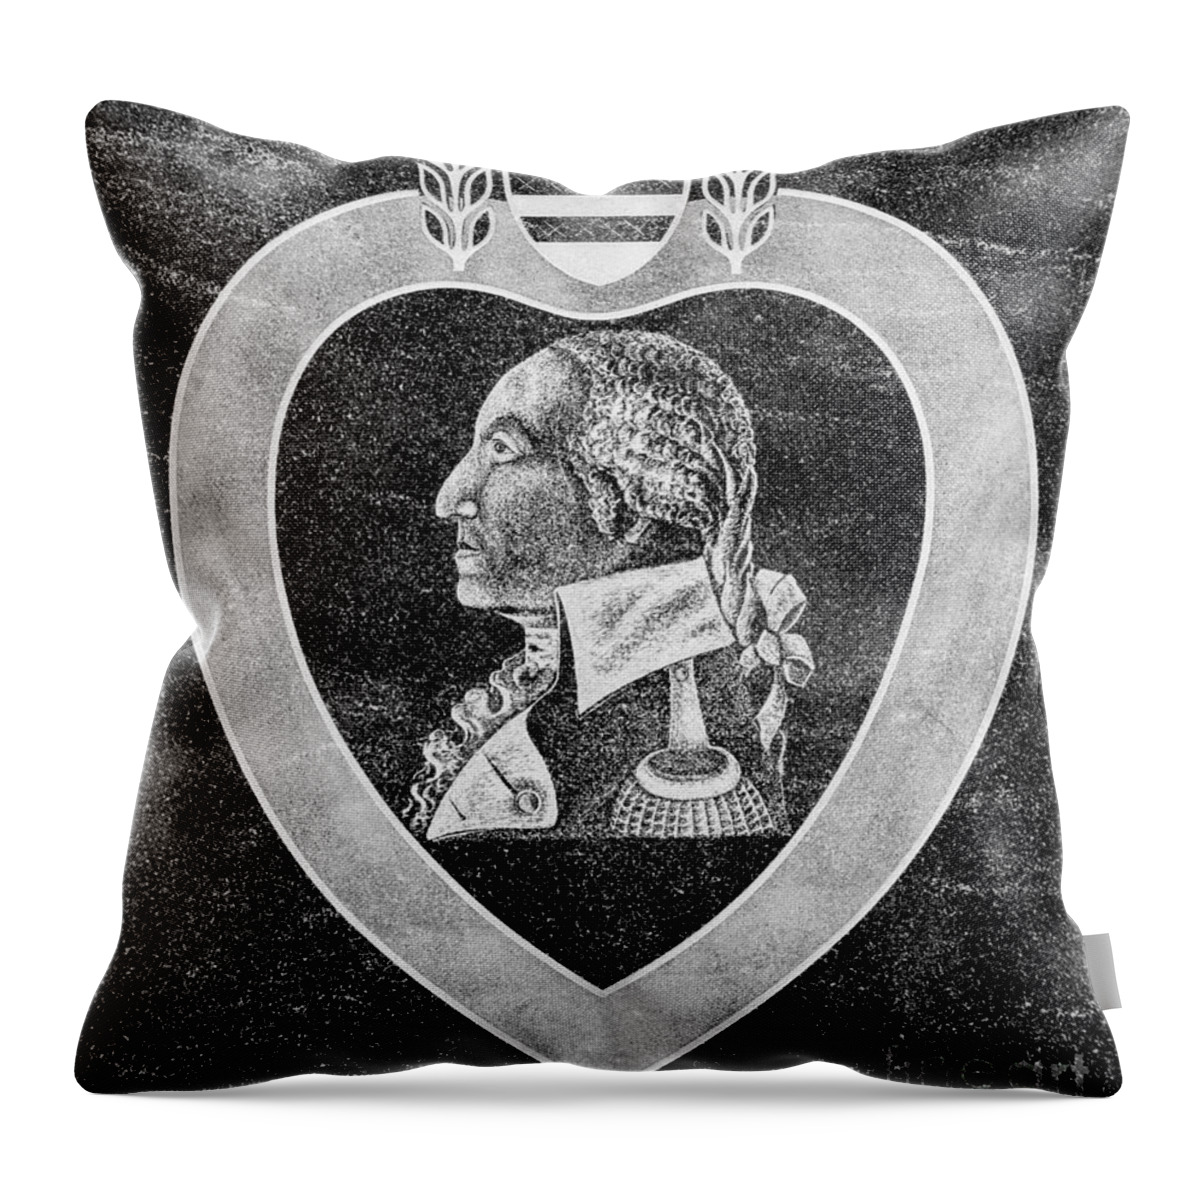 Purple Heart Throw Pillow featuring the photograph Purple Heart Emblem Polished Granite by Gary Whitton